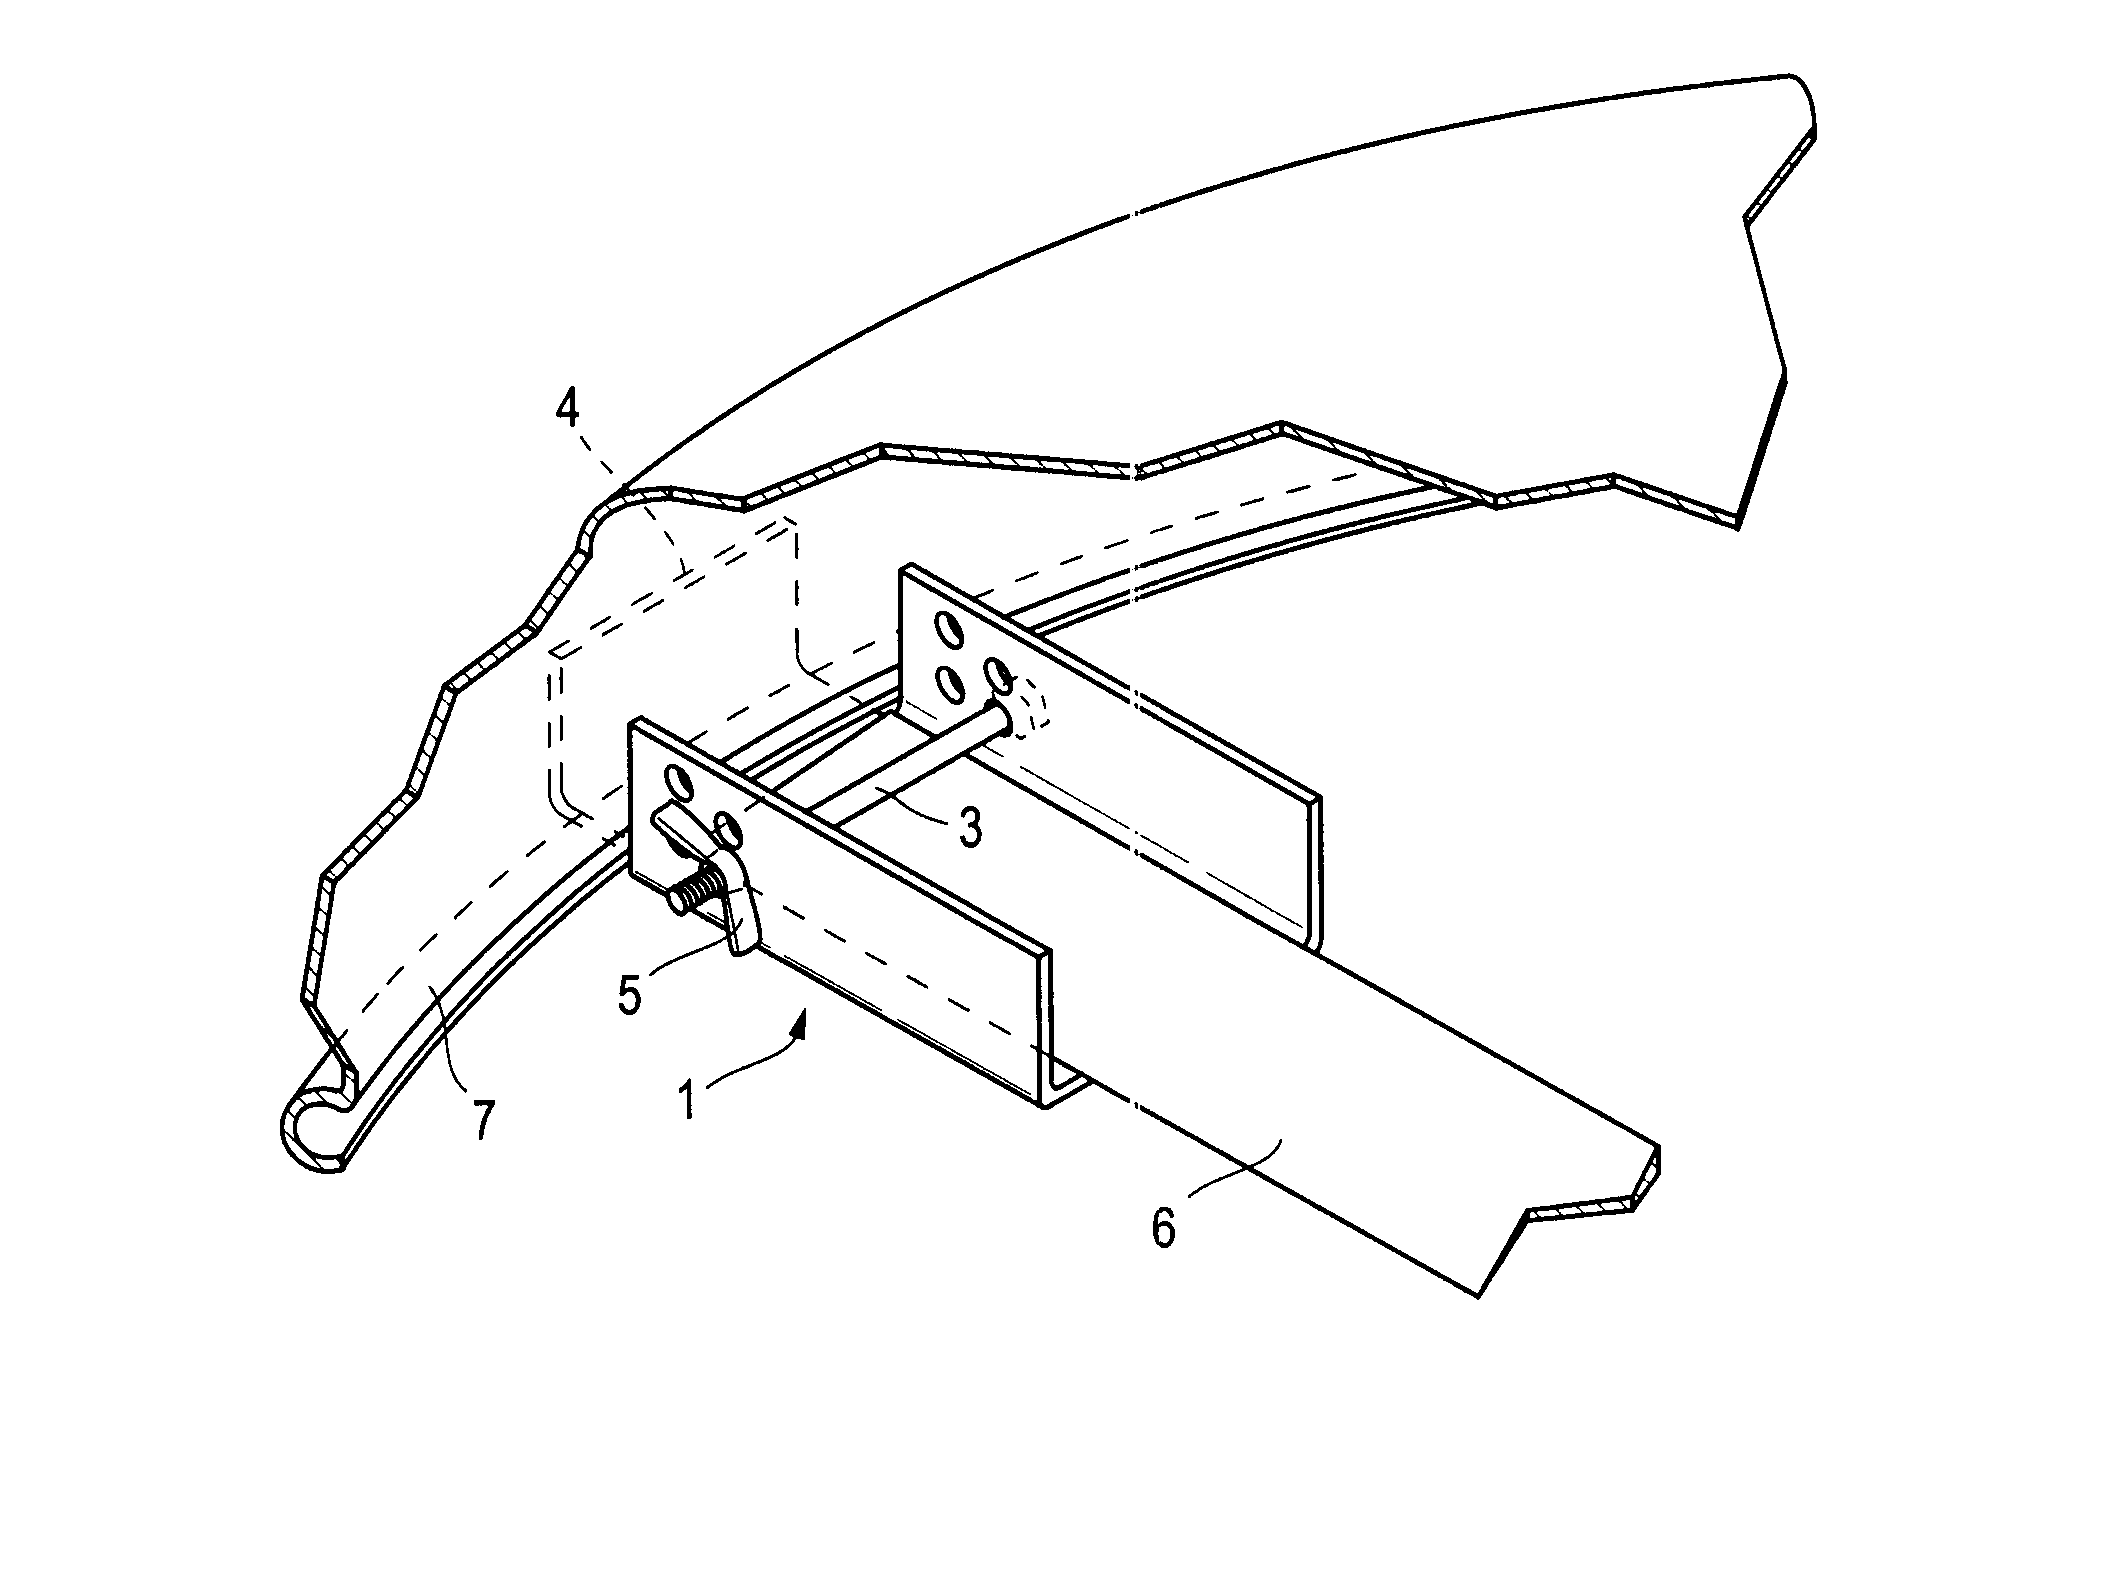 Rotary mower blade removal and reinstallation device